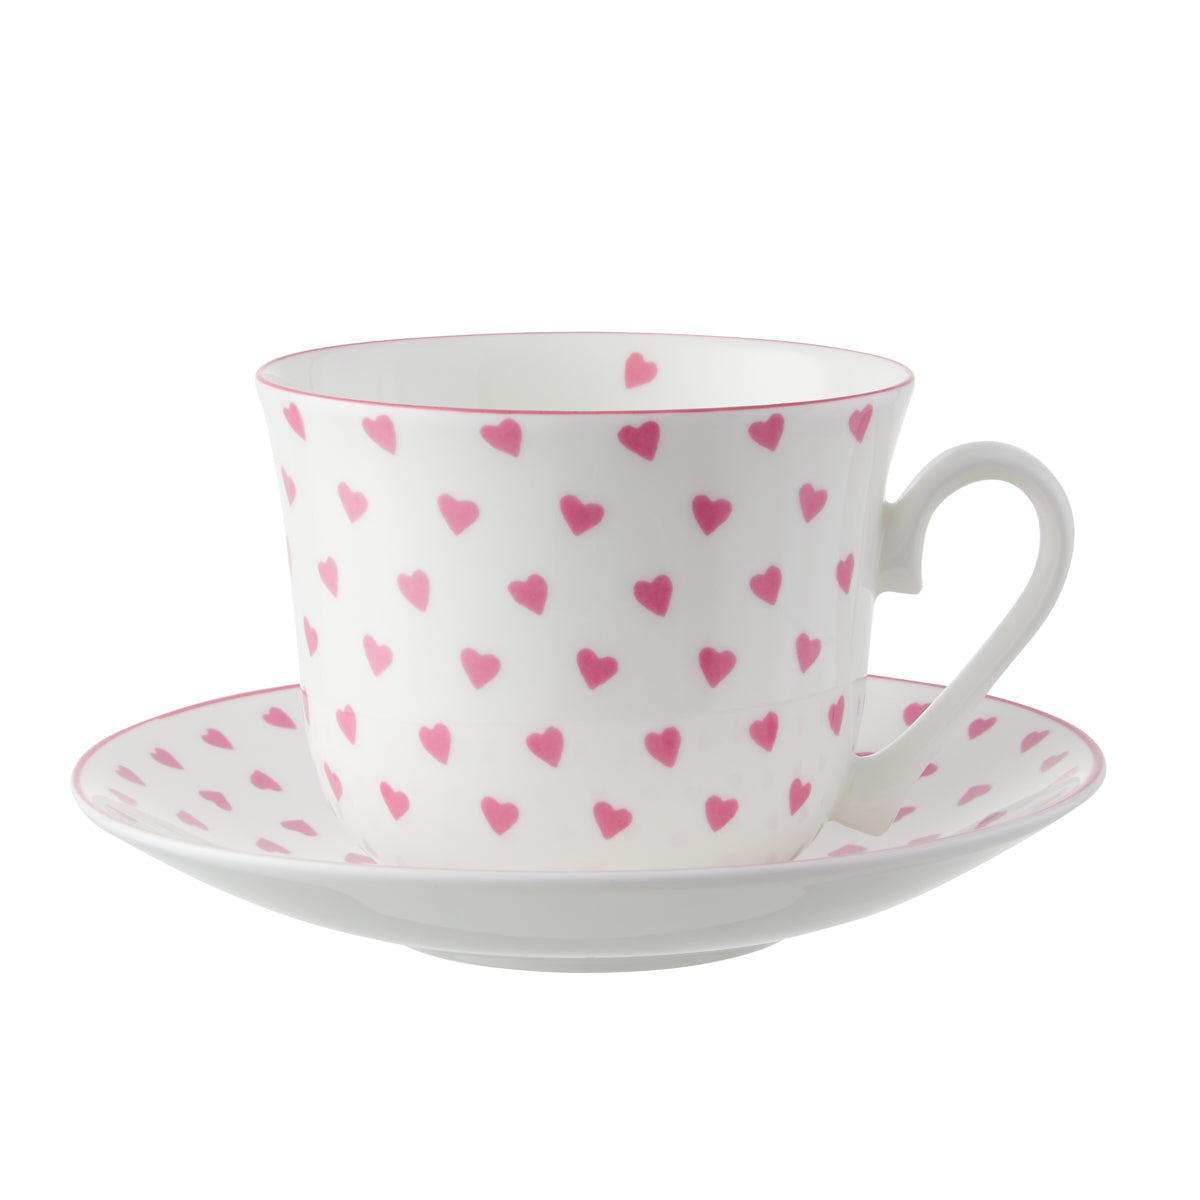 Chatsworth Breakfast Cup & Saucer - Pink Heart